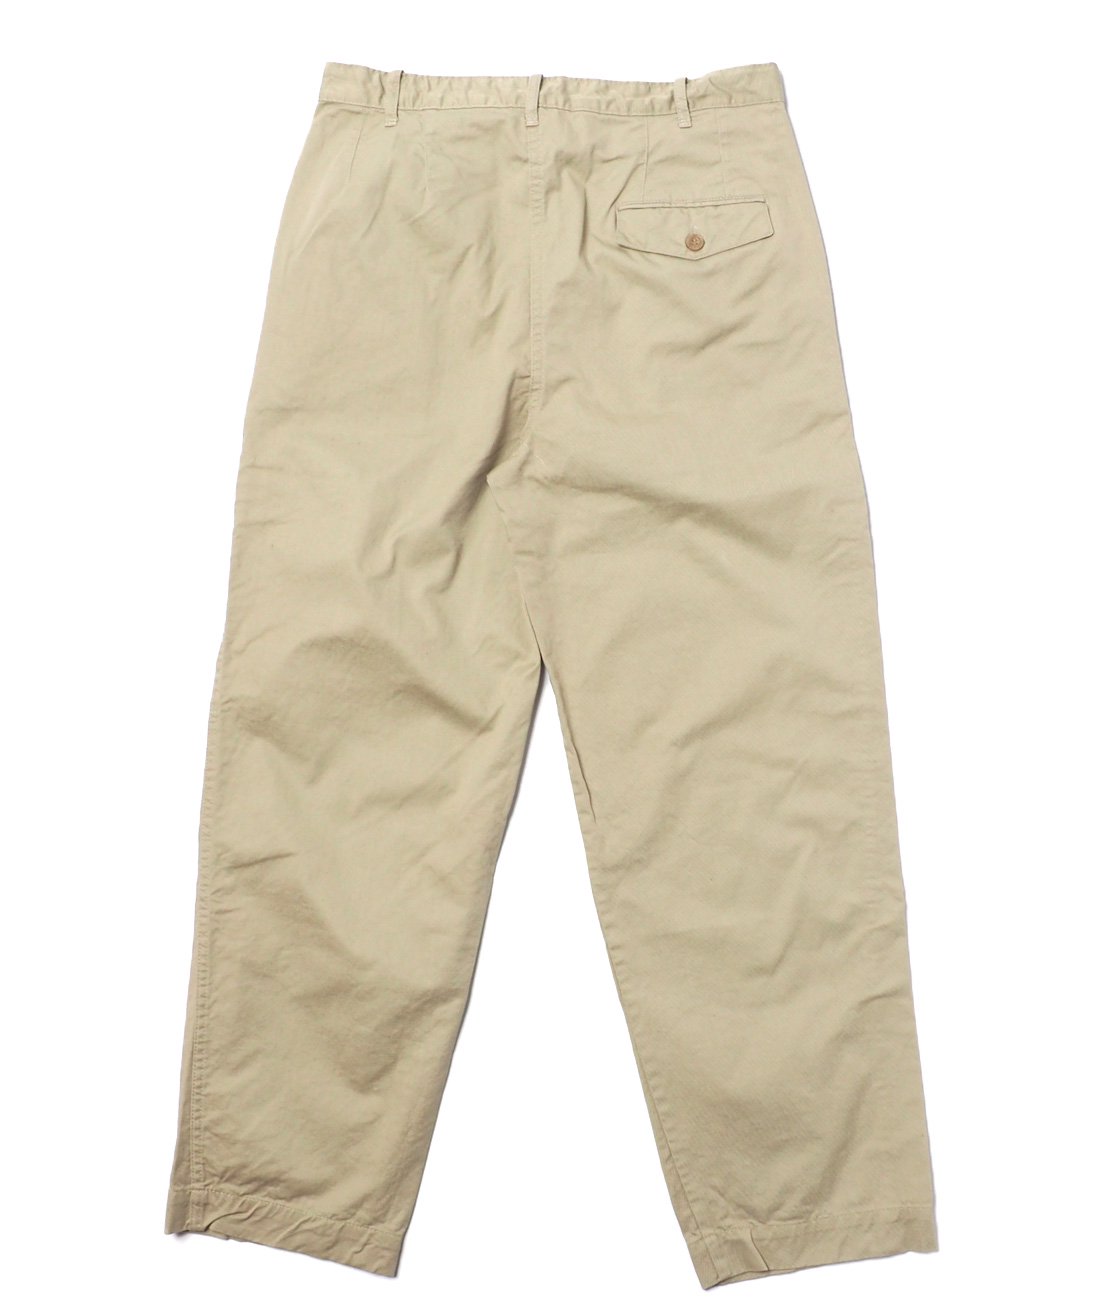 【DEAD STOCK】90s DUTCH ARMY CHINO TROUSERS